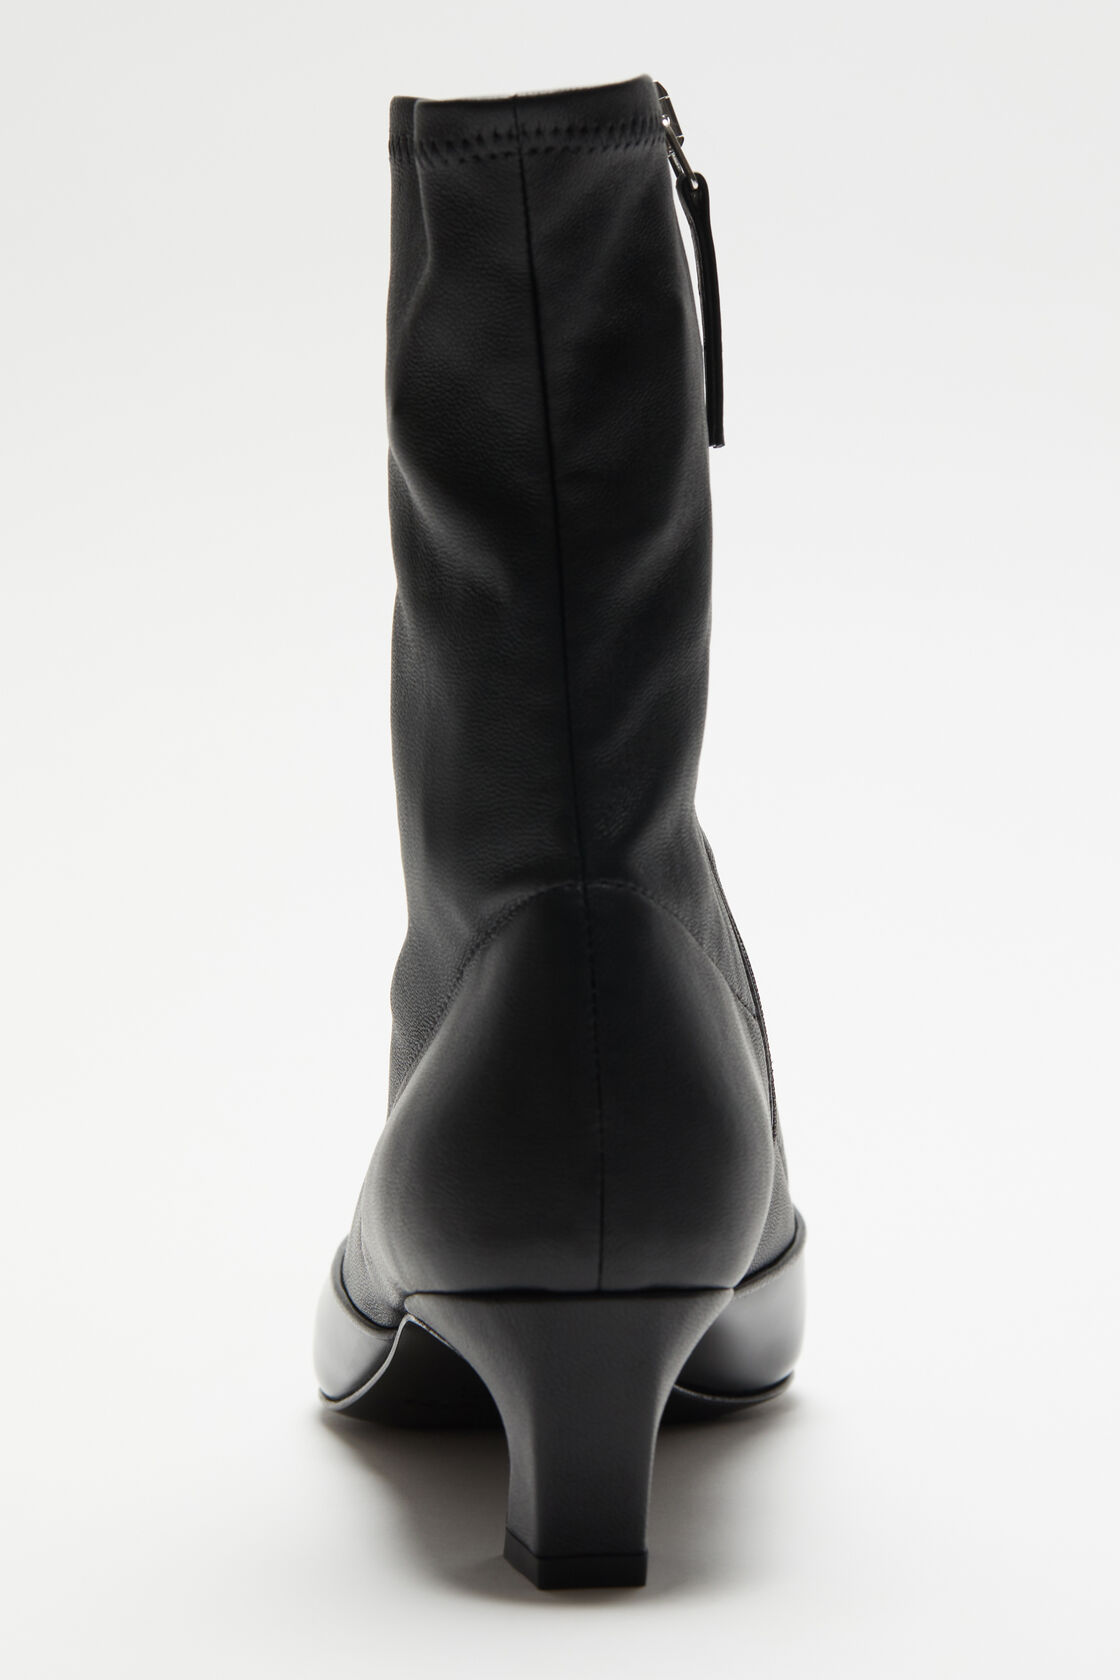 ACNE STUDIOS Ankle Boots in Black 40